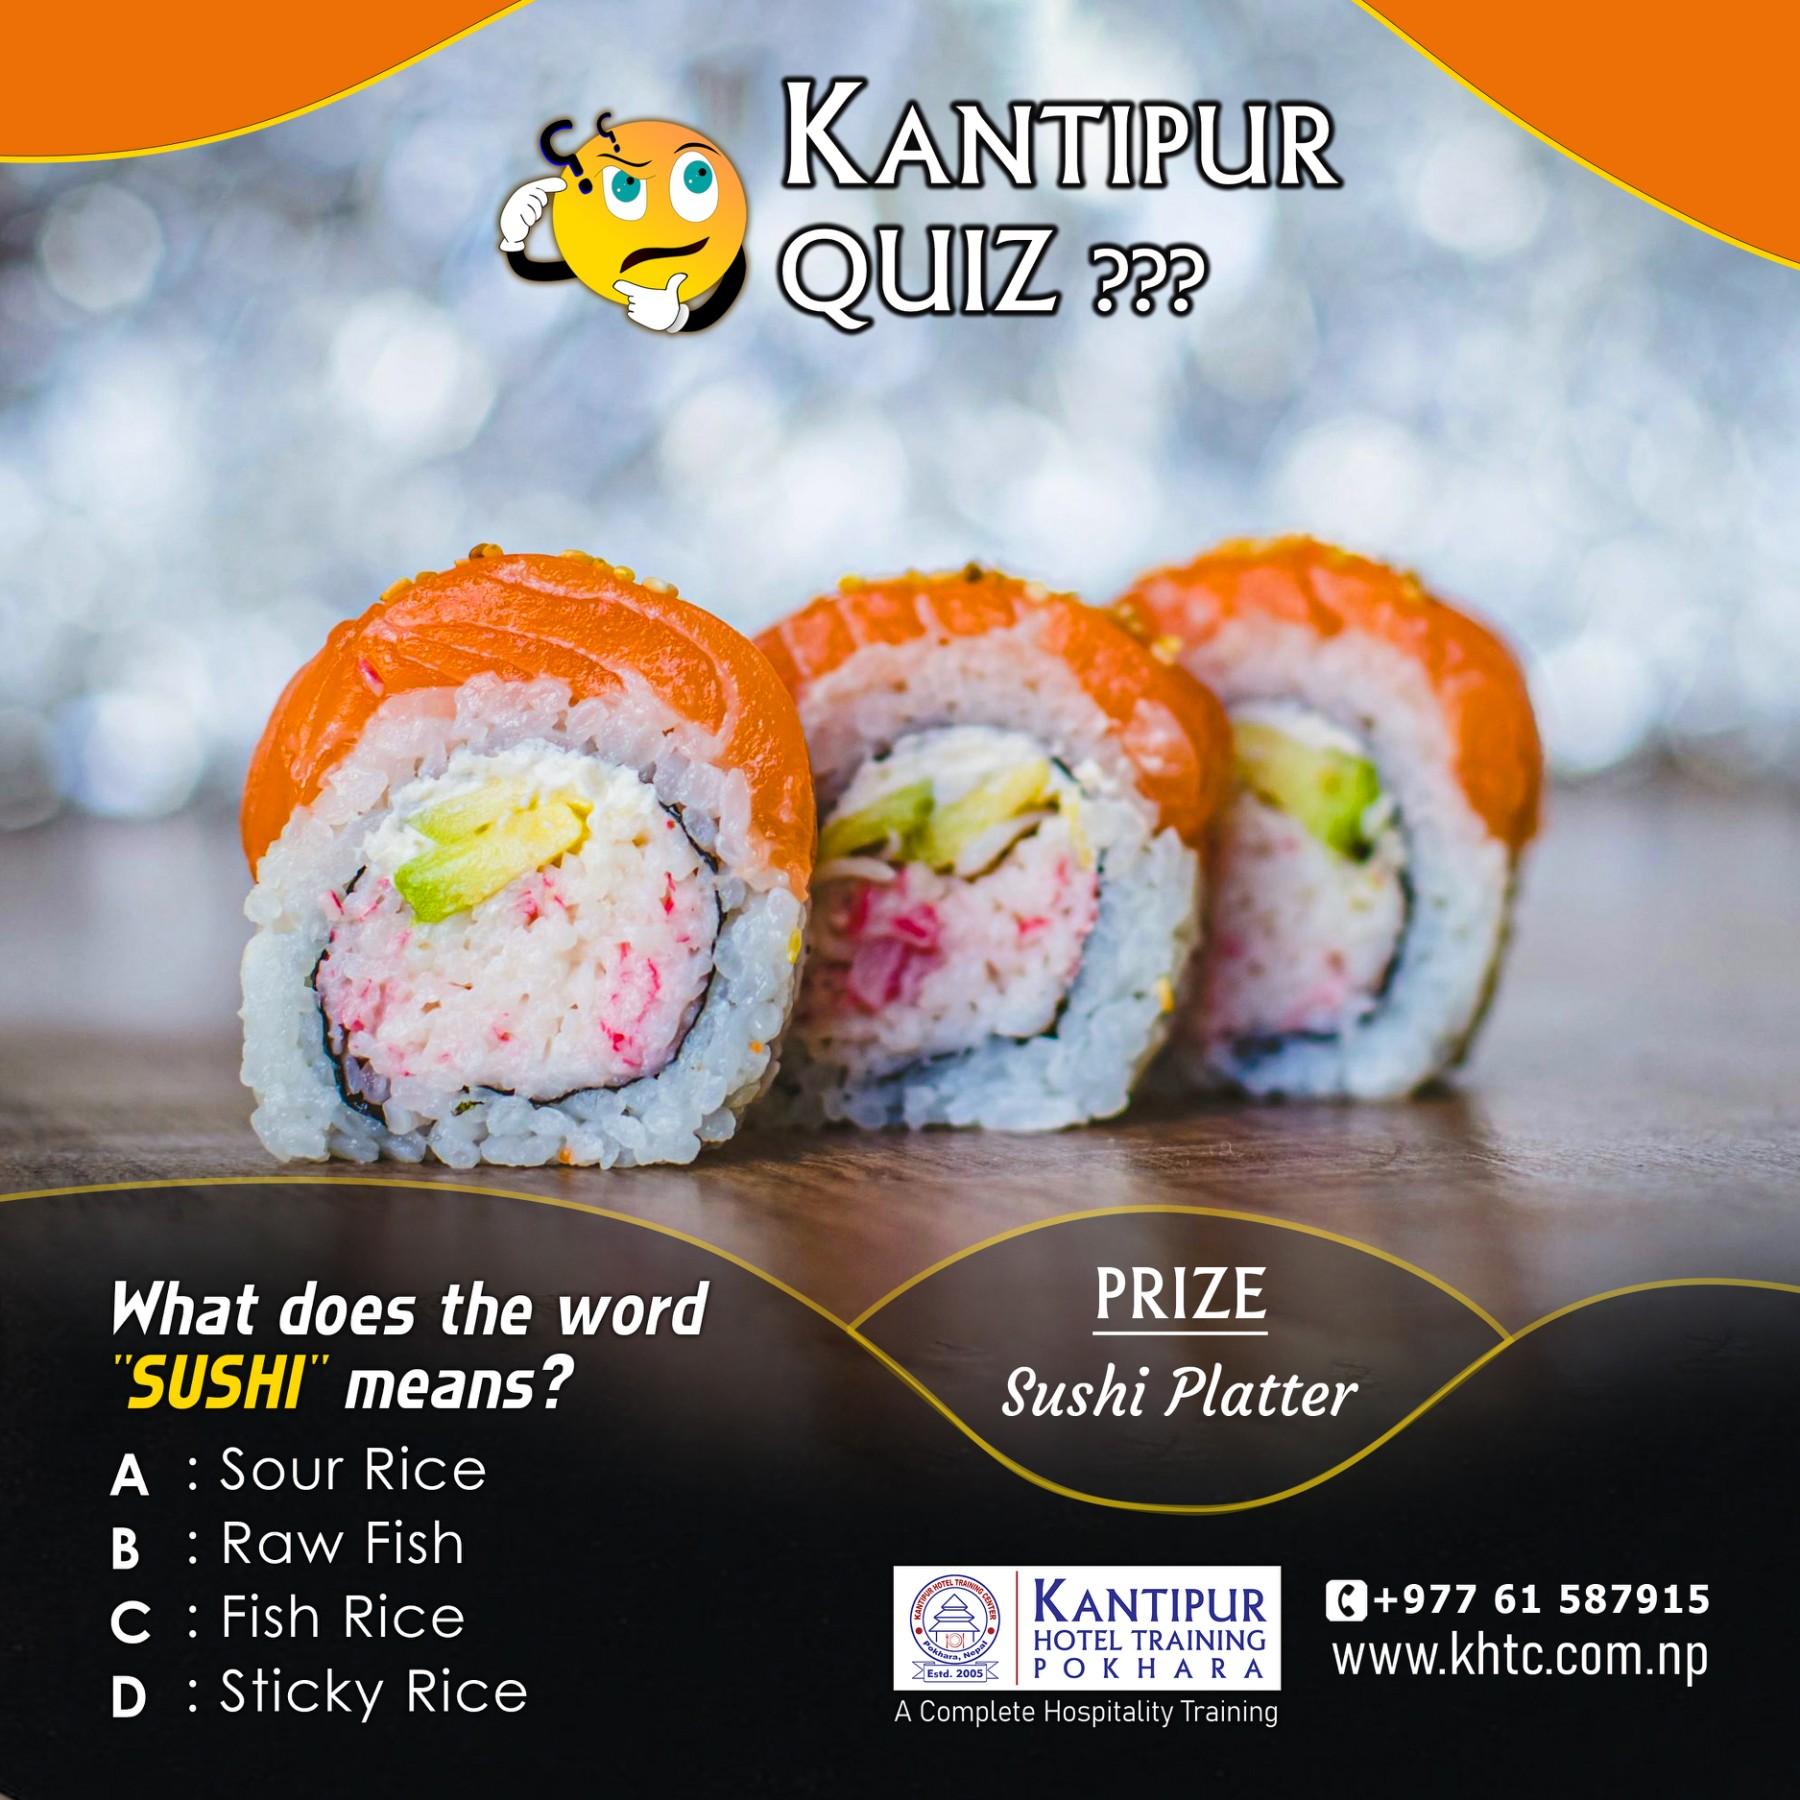 As we mentioned that Kantipur quiz includes different questions related to Cooking, Bar, Barista, Housekeeping, and more . This is the question from Sushi making Course under Food Production Program 